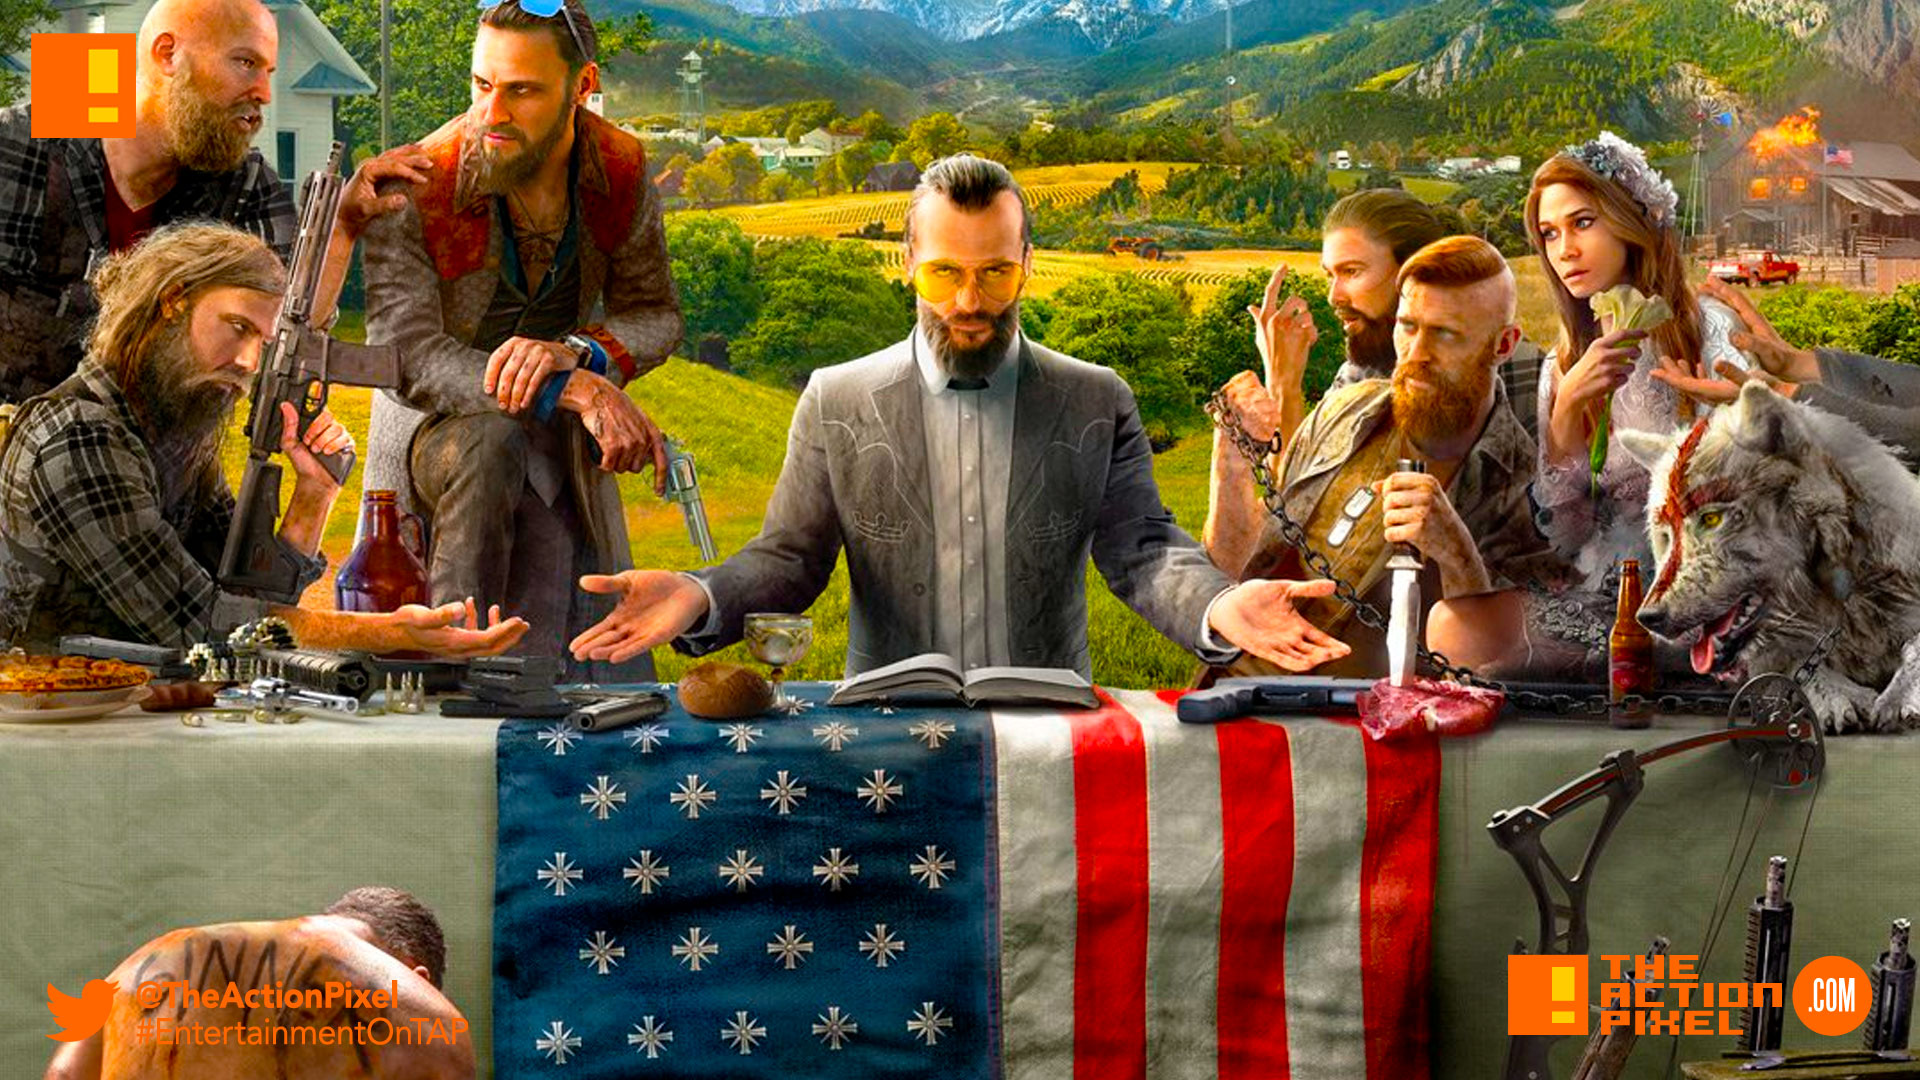 far cry, ubisoft, teaser, montana, hope country, america, teaser, teaser trailers, trailers, worldwide reveal, the action pixel,entertainment on tap,